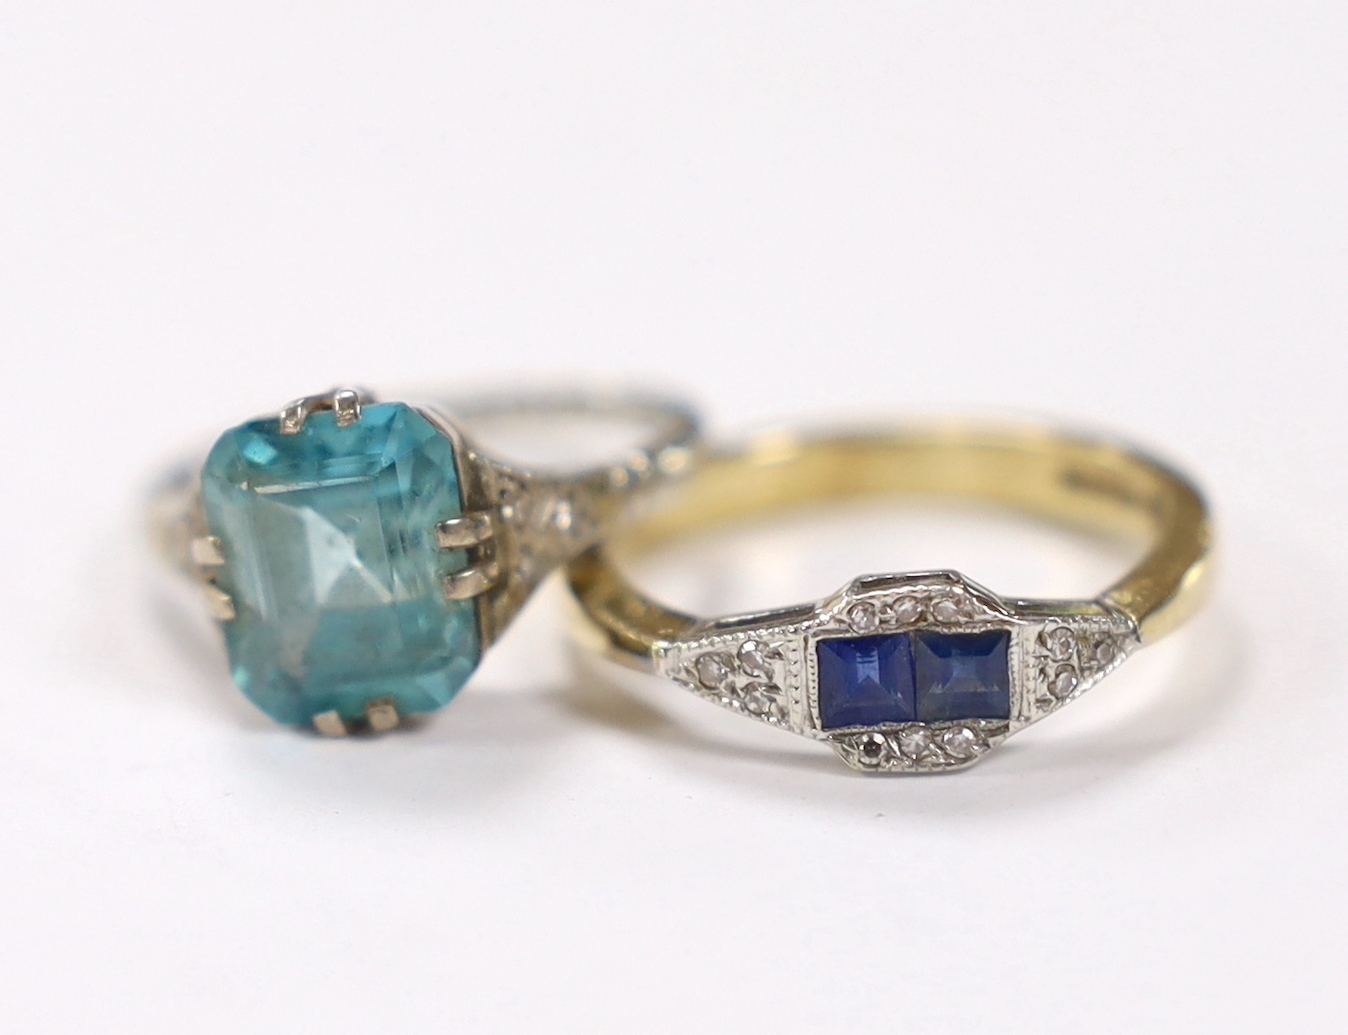 An Art Deco 18ct, plat and blue zircon set ring, with diamond chip set shoulders, size L, together with a modern Art Deco style 9ct gold, sapphire and diamond set ring, gross weight 6.7 gram.